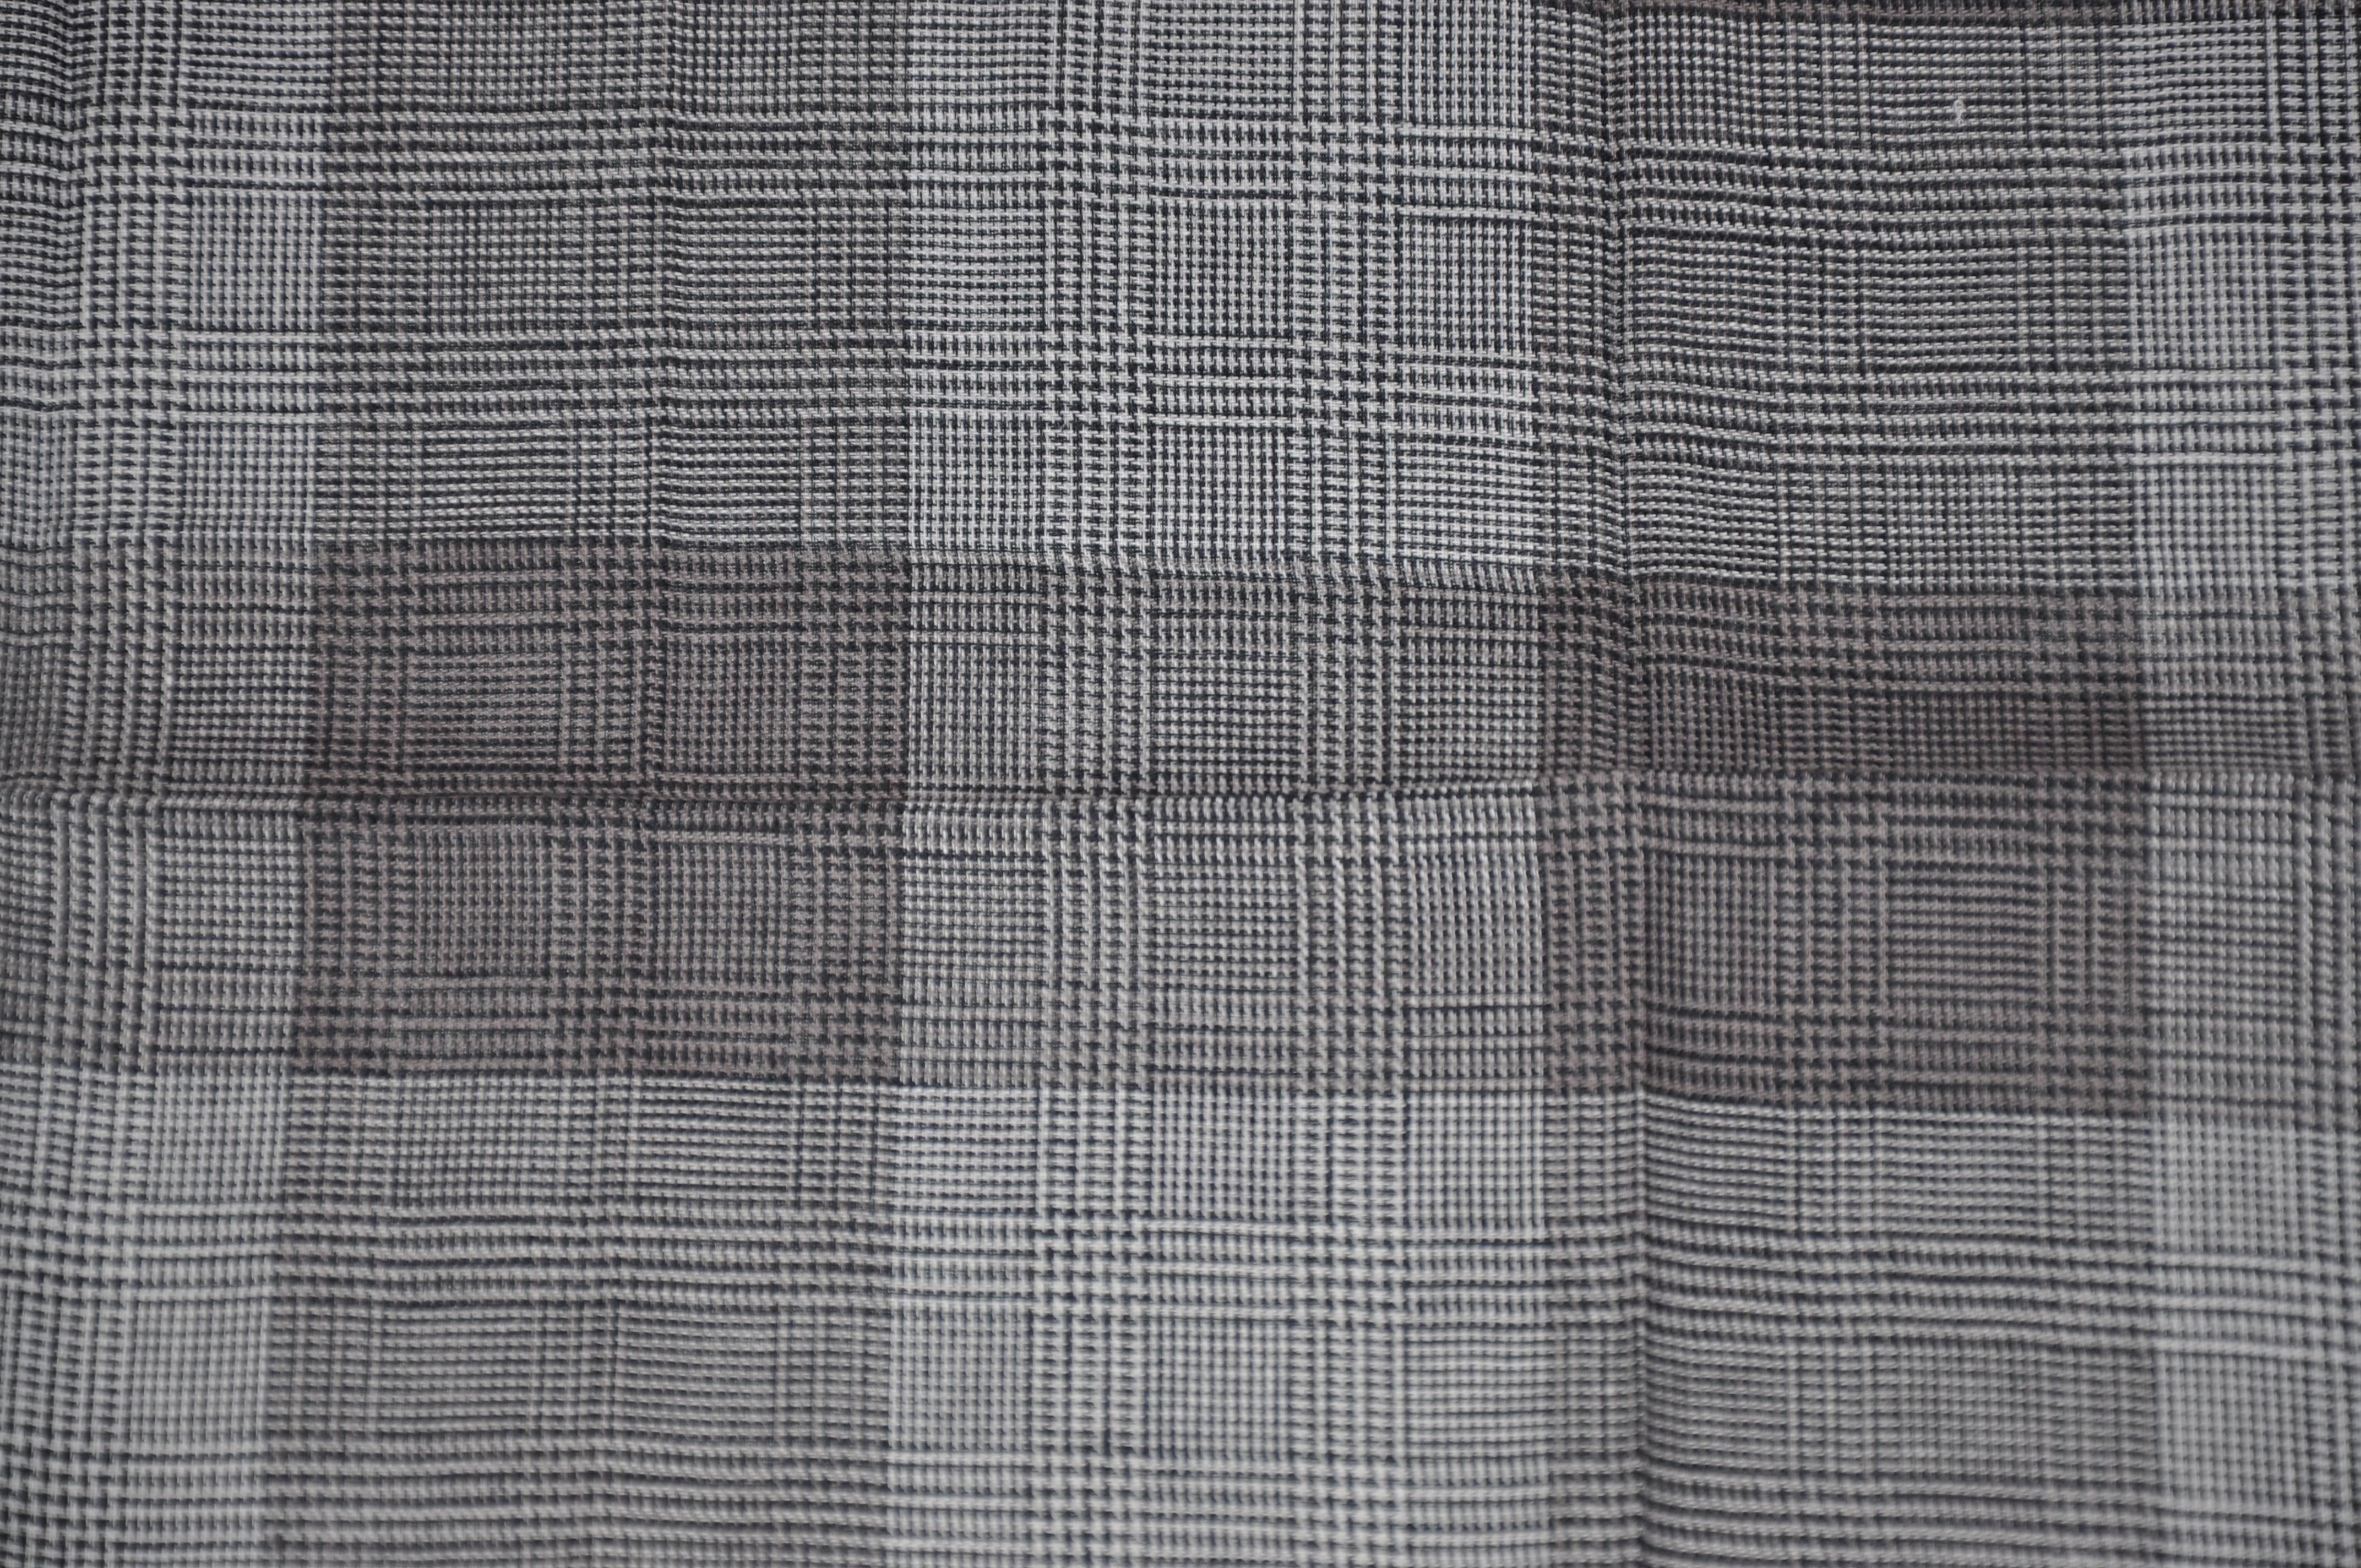 Christian Aujard Shades of Gray Micro Checkered Cotton Handkerchief For Sale 1